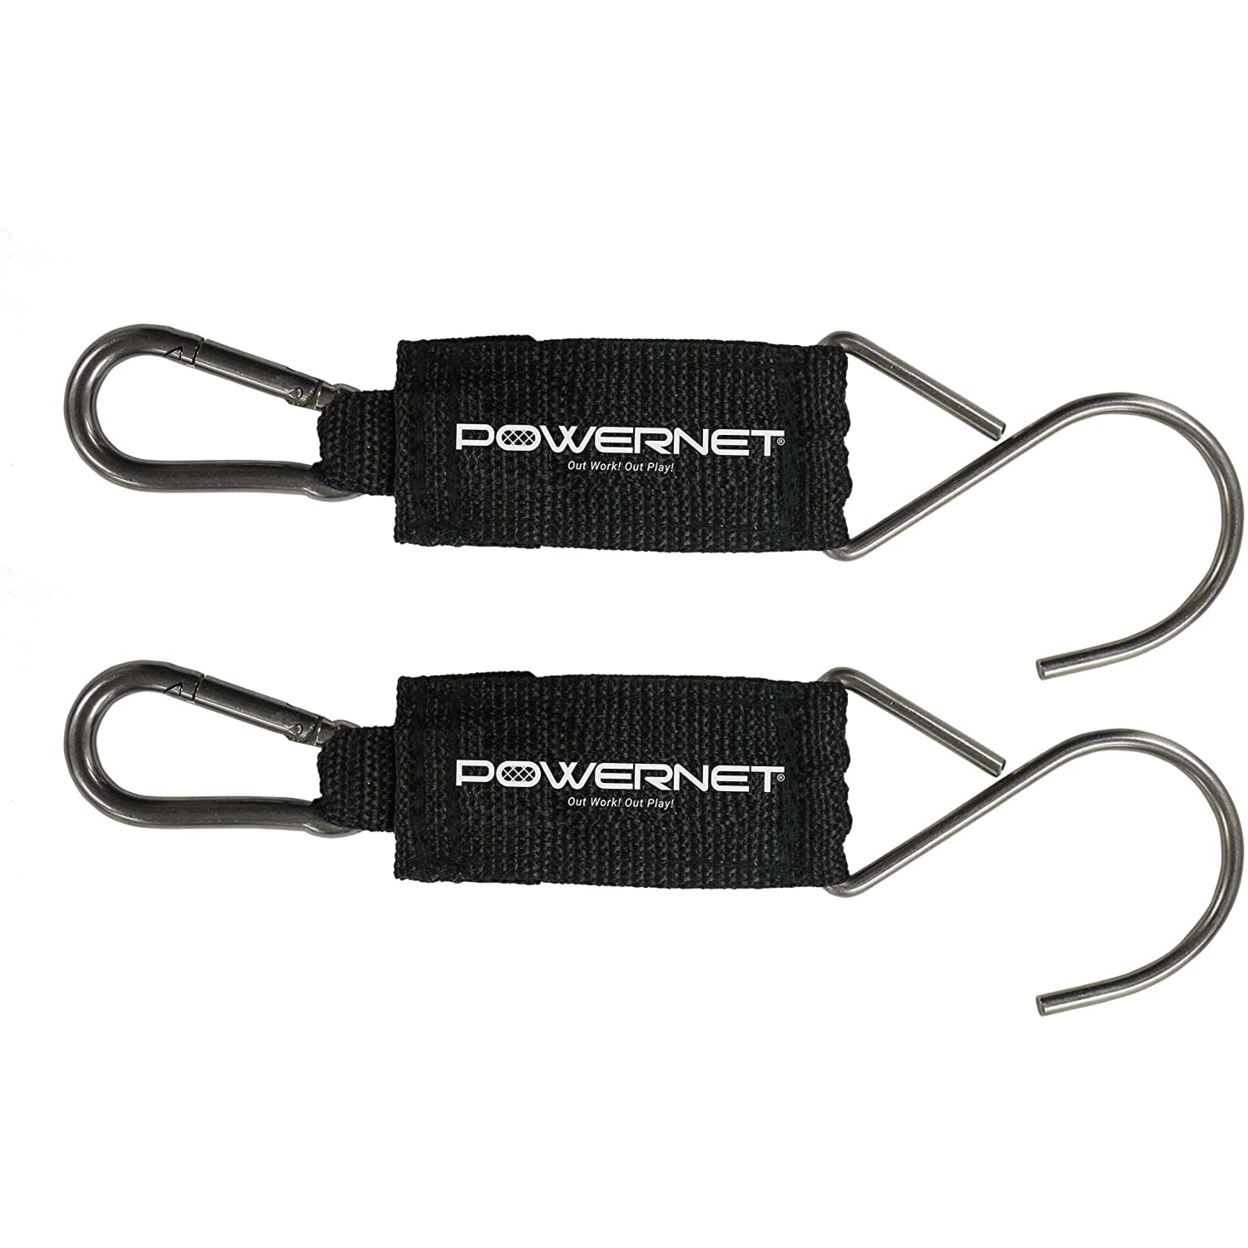 PowerNet Fence Hook 2-Pack For Keeping Gear Organized, Convenient & Safe (1164)